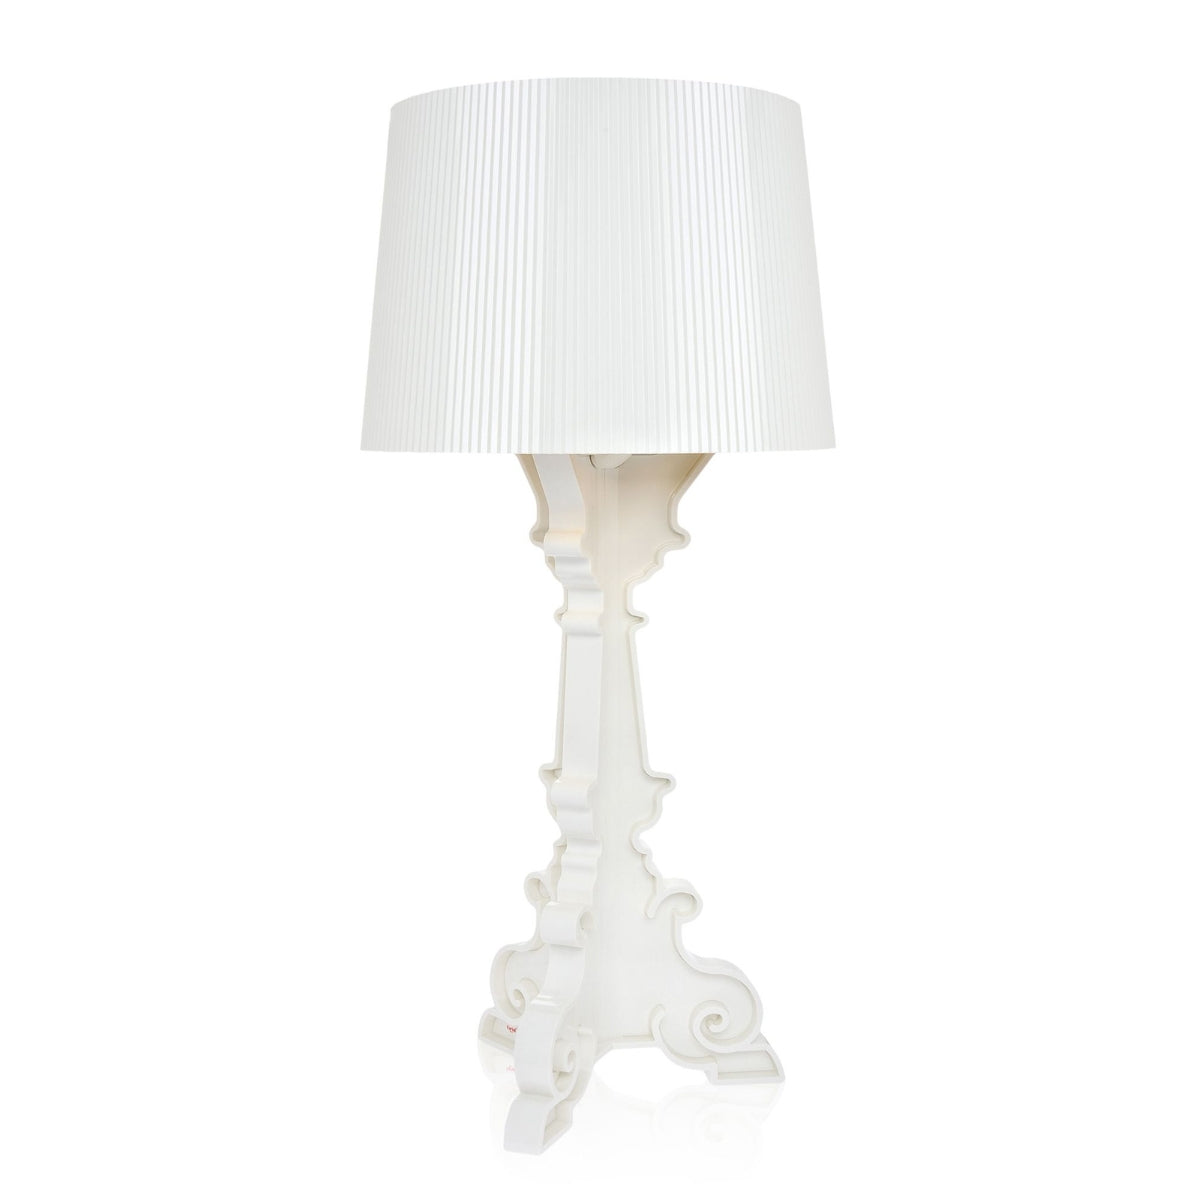 Bourgie White and Gold Lamp - Kartell